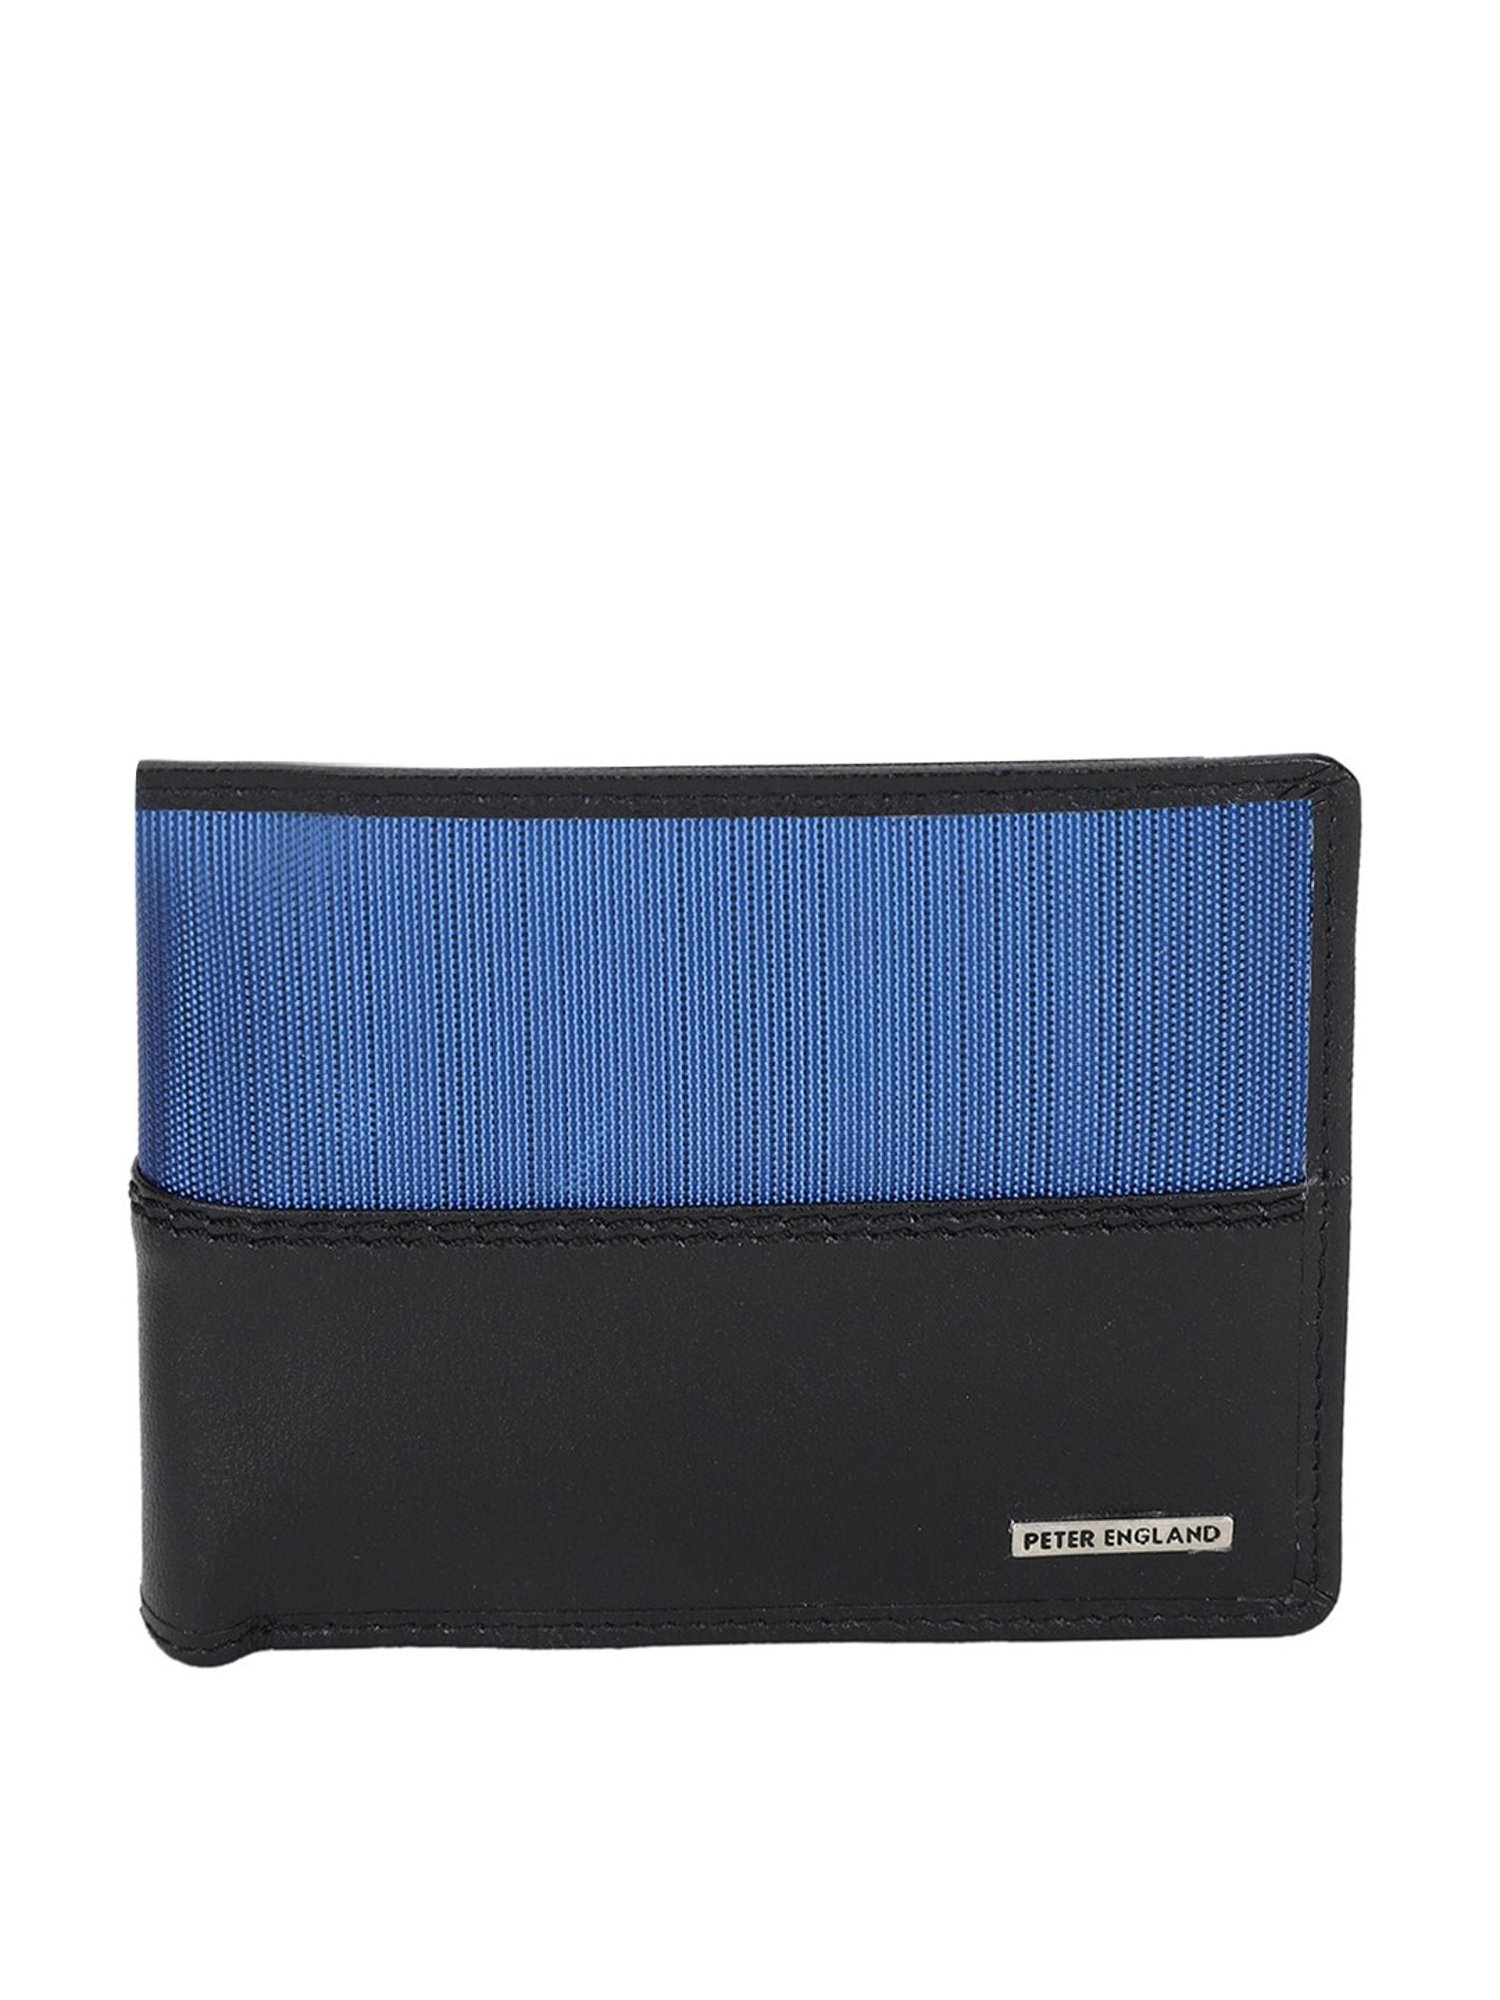 Buy Peter England Navy Leather Wallet at Amazon.in